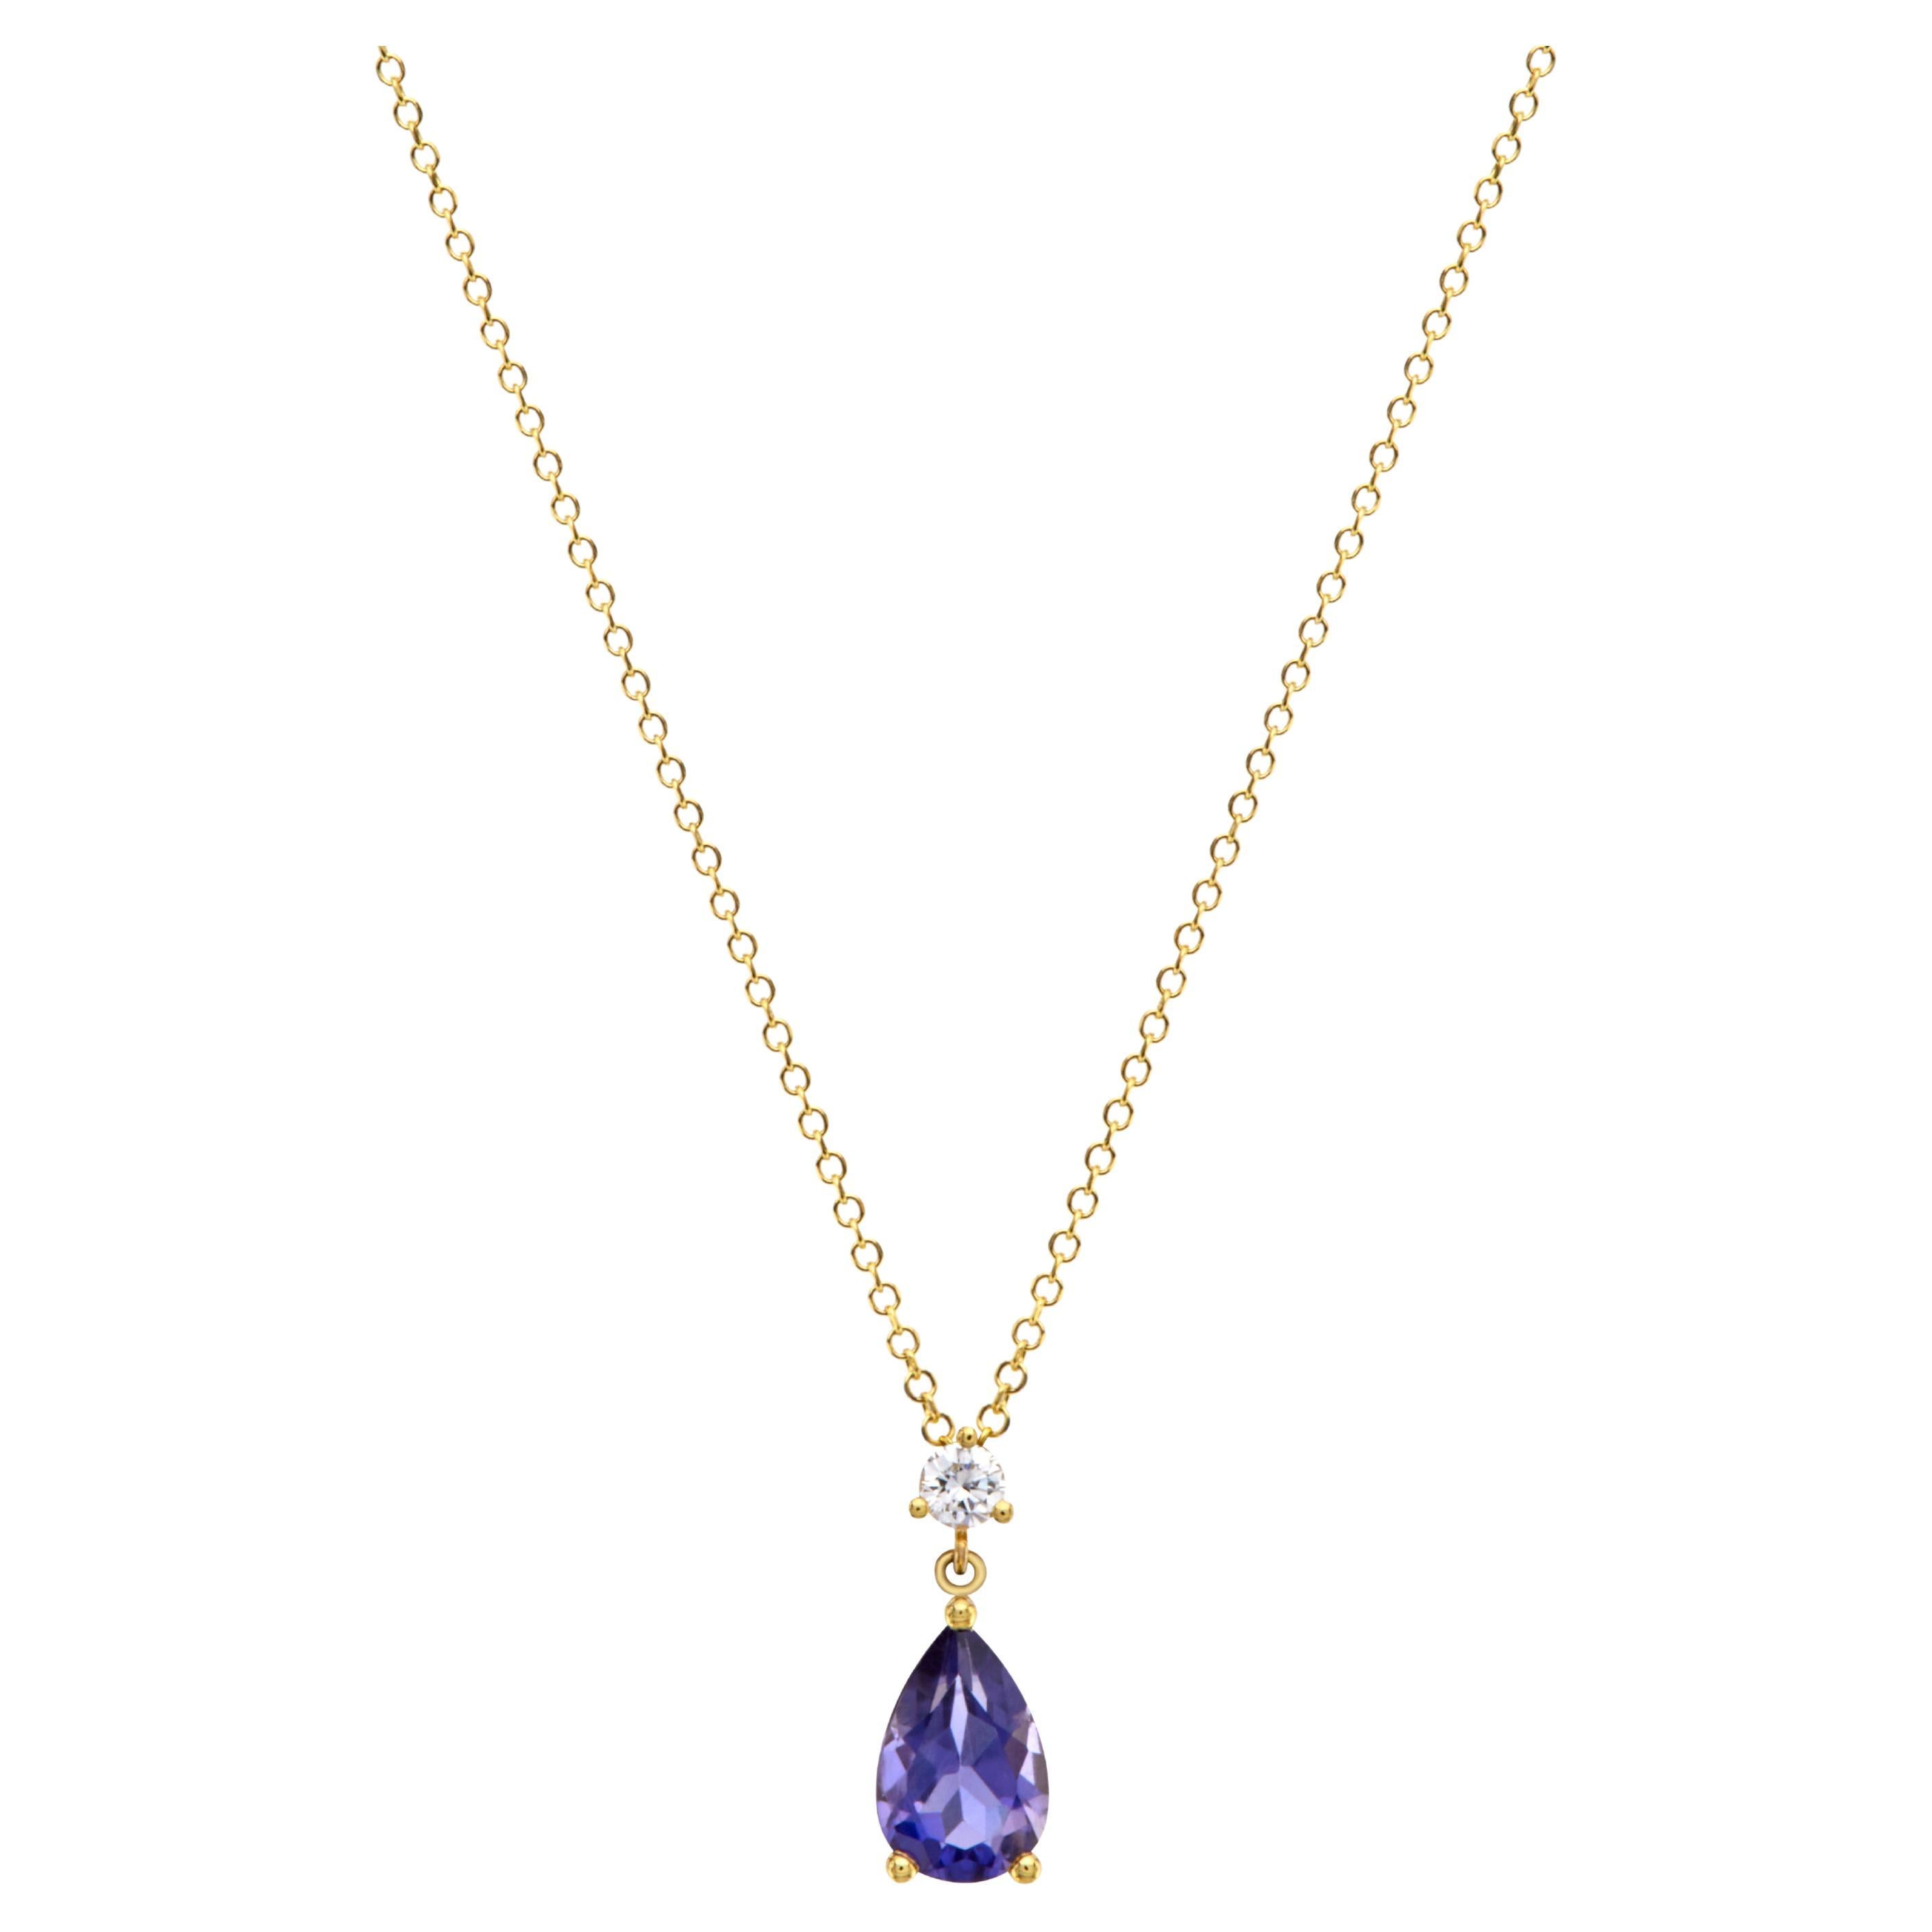 Pear Pendant Mini Necklace in 18Kt Yellow Gold with Iolite and Diamond Easy Wear